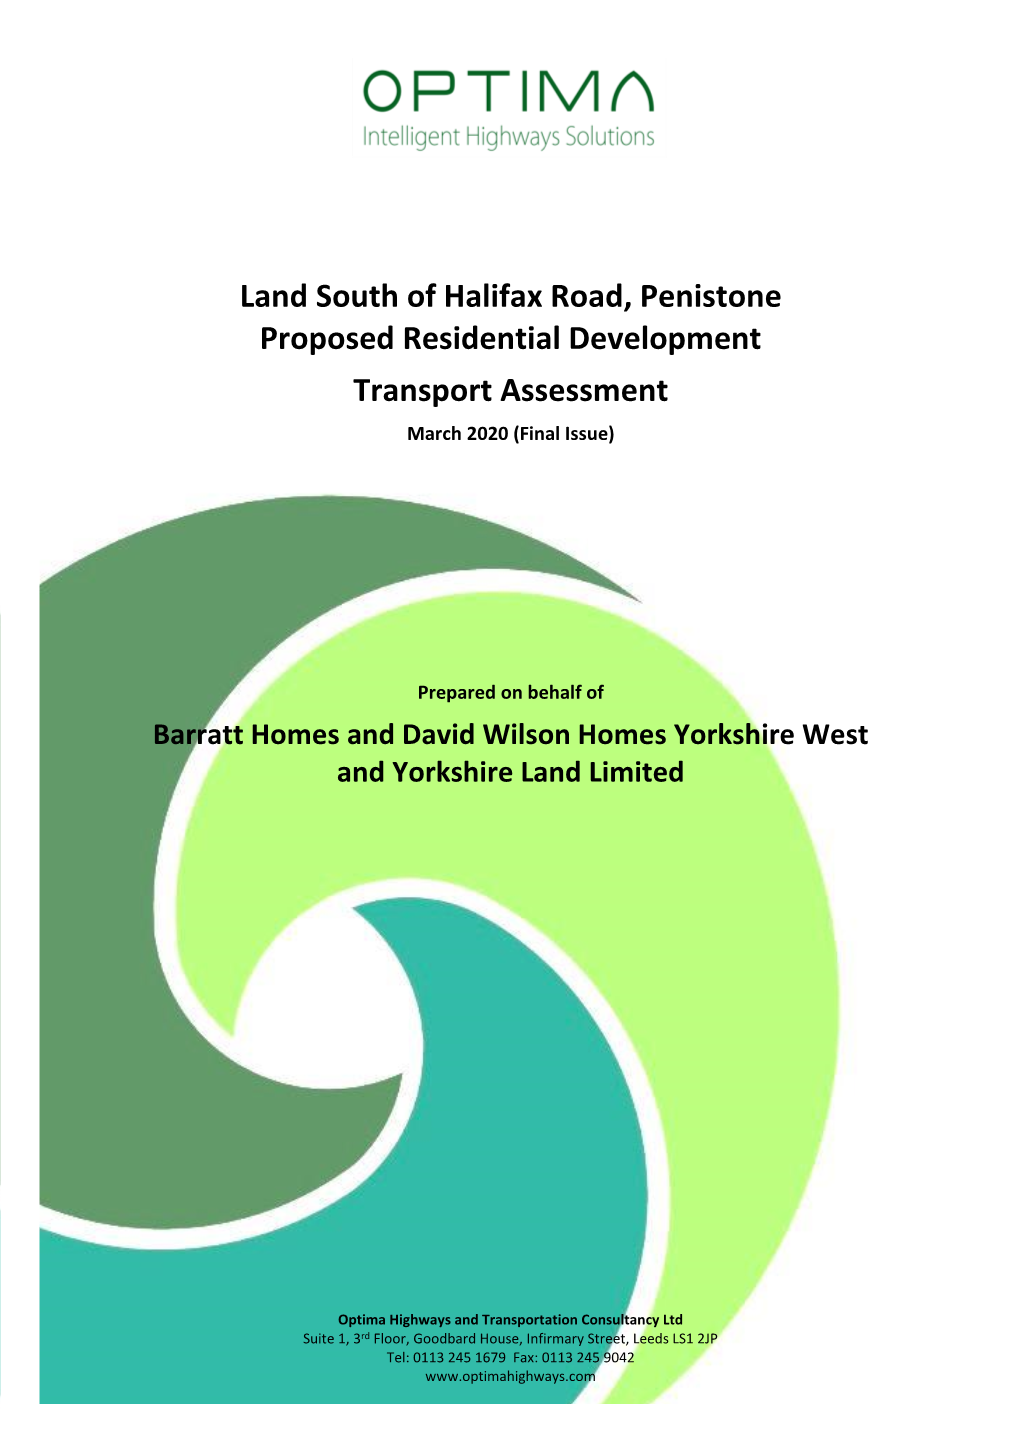 Land South of Halifax Road, Penistone Proposed Residential Development Transport Assessment March 2020 (Final Issue)